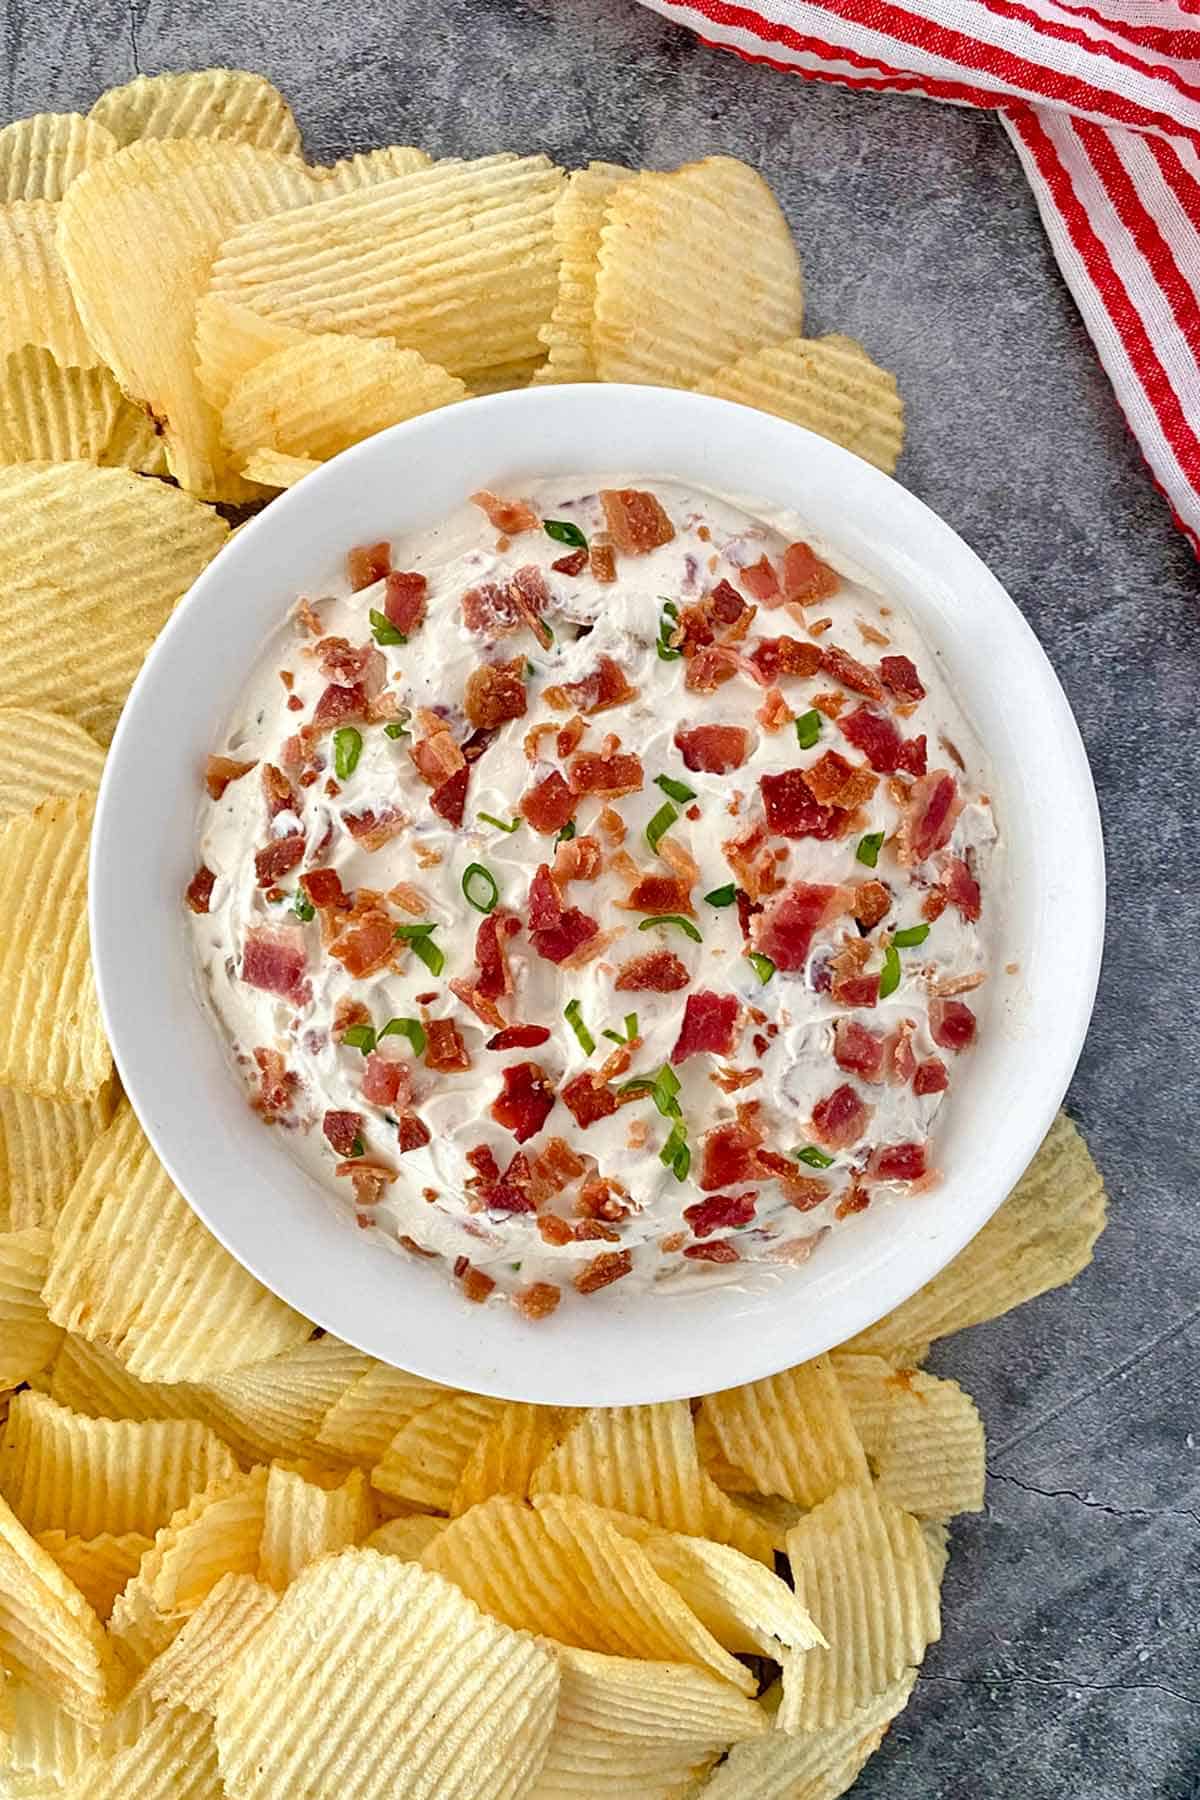 A bowl of horseradish dip with bacon surrounded by ridged potato chips.